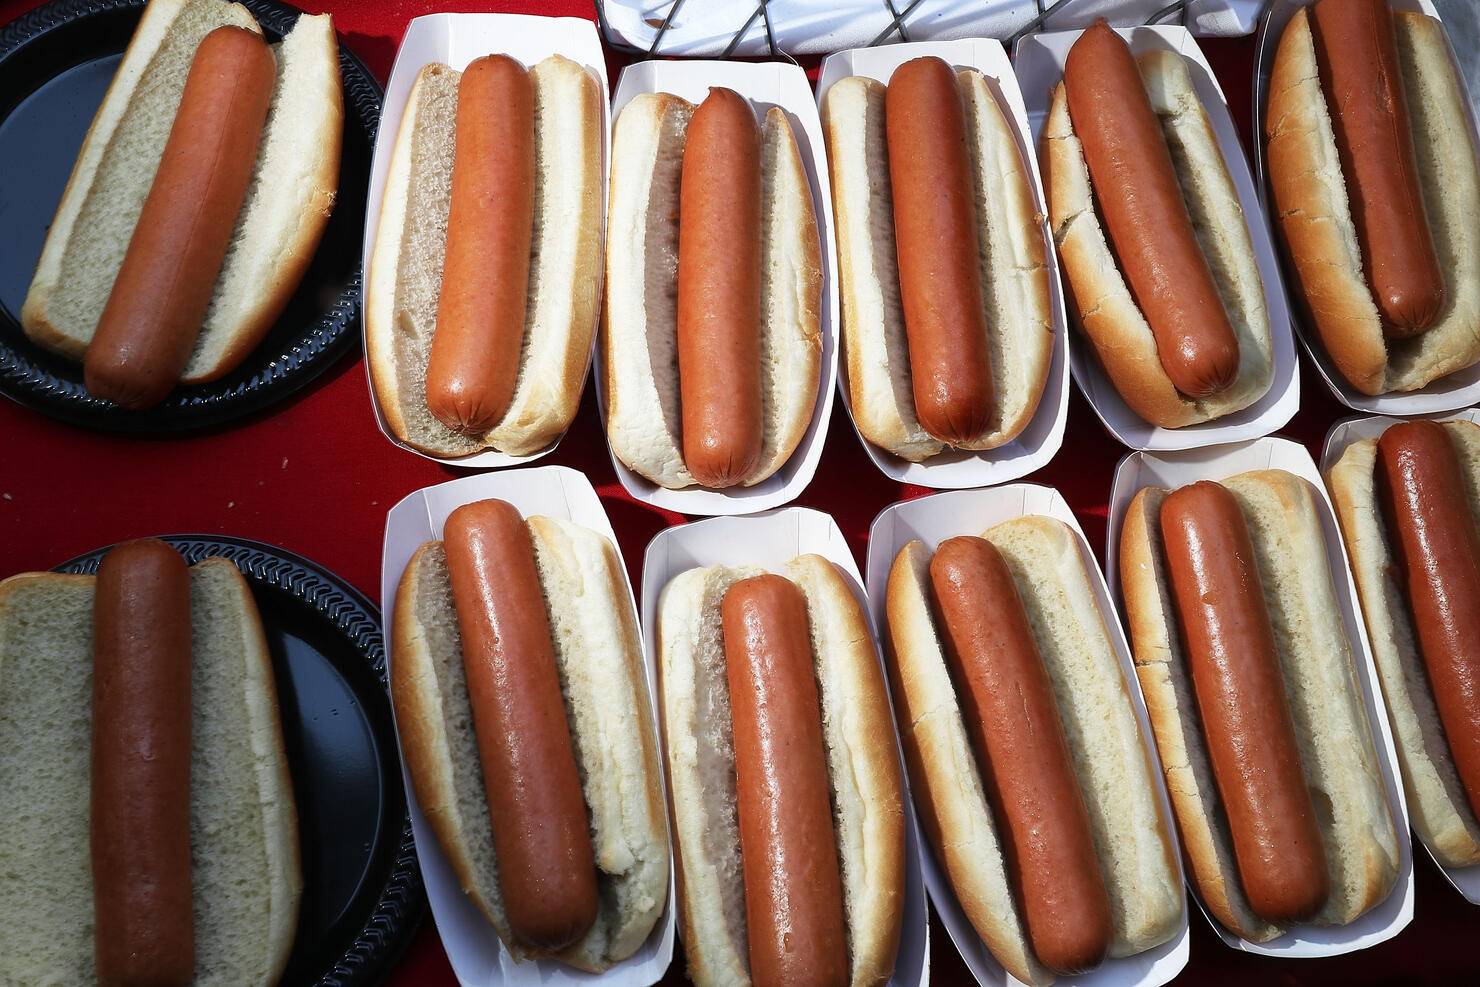 Annual Hot Dog Lunch Held For Lawmakers On Capitol Hill